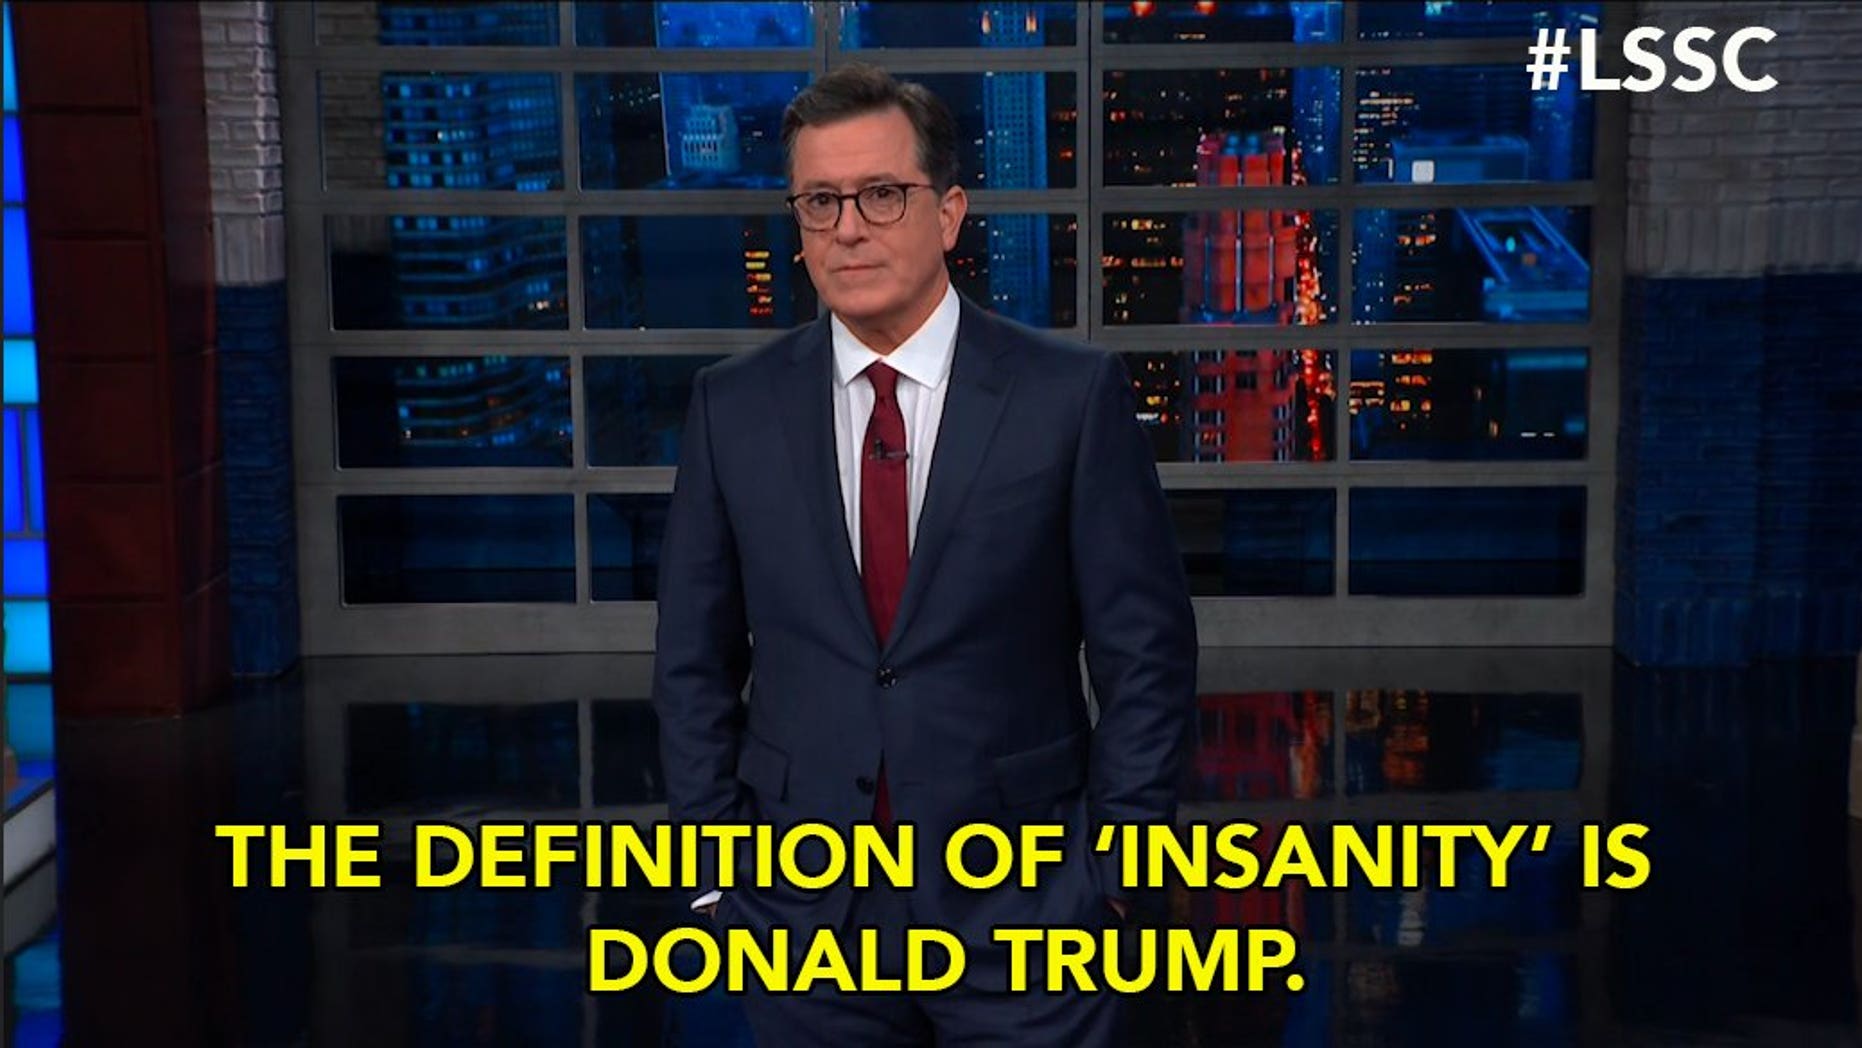 Colbert rails into Trump over border wall miss, says definition of insanity is Donald Trump